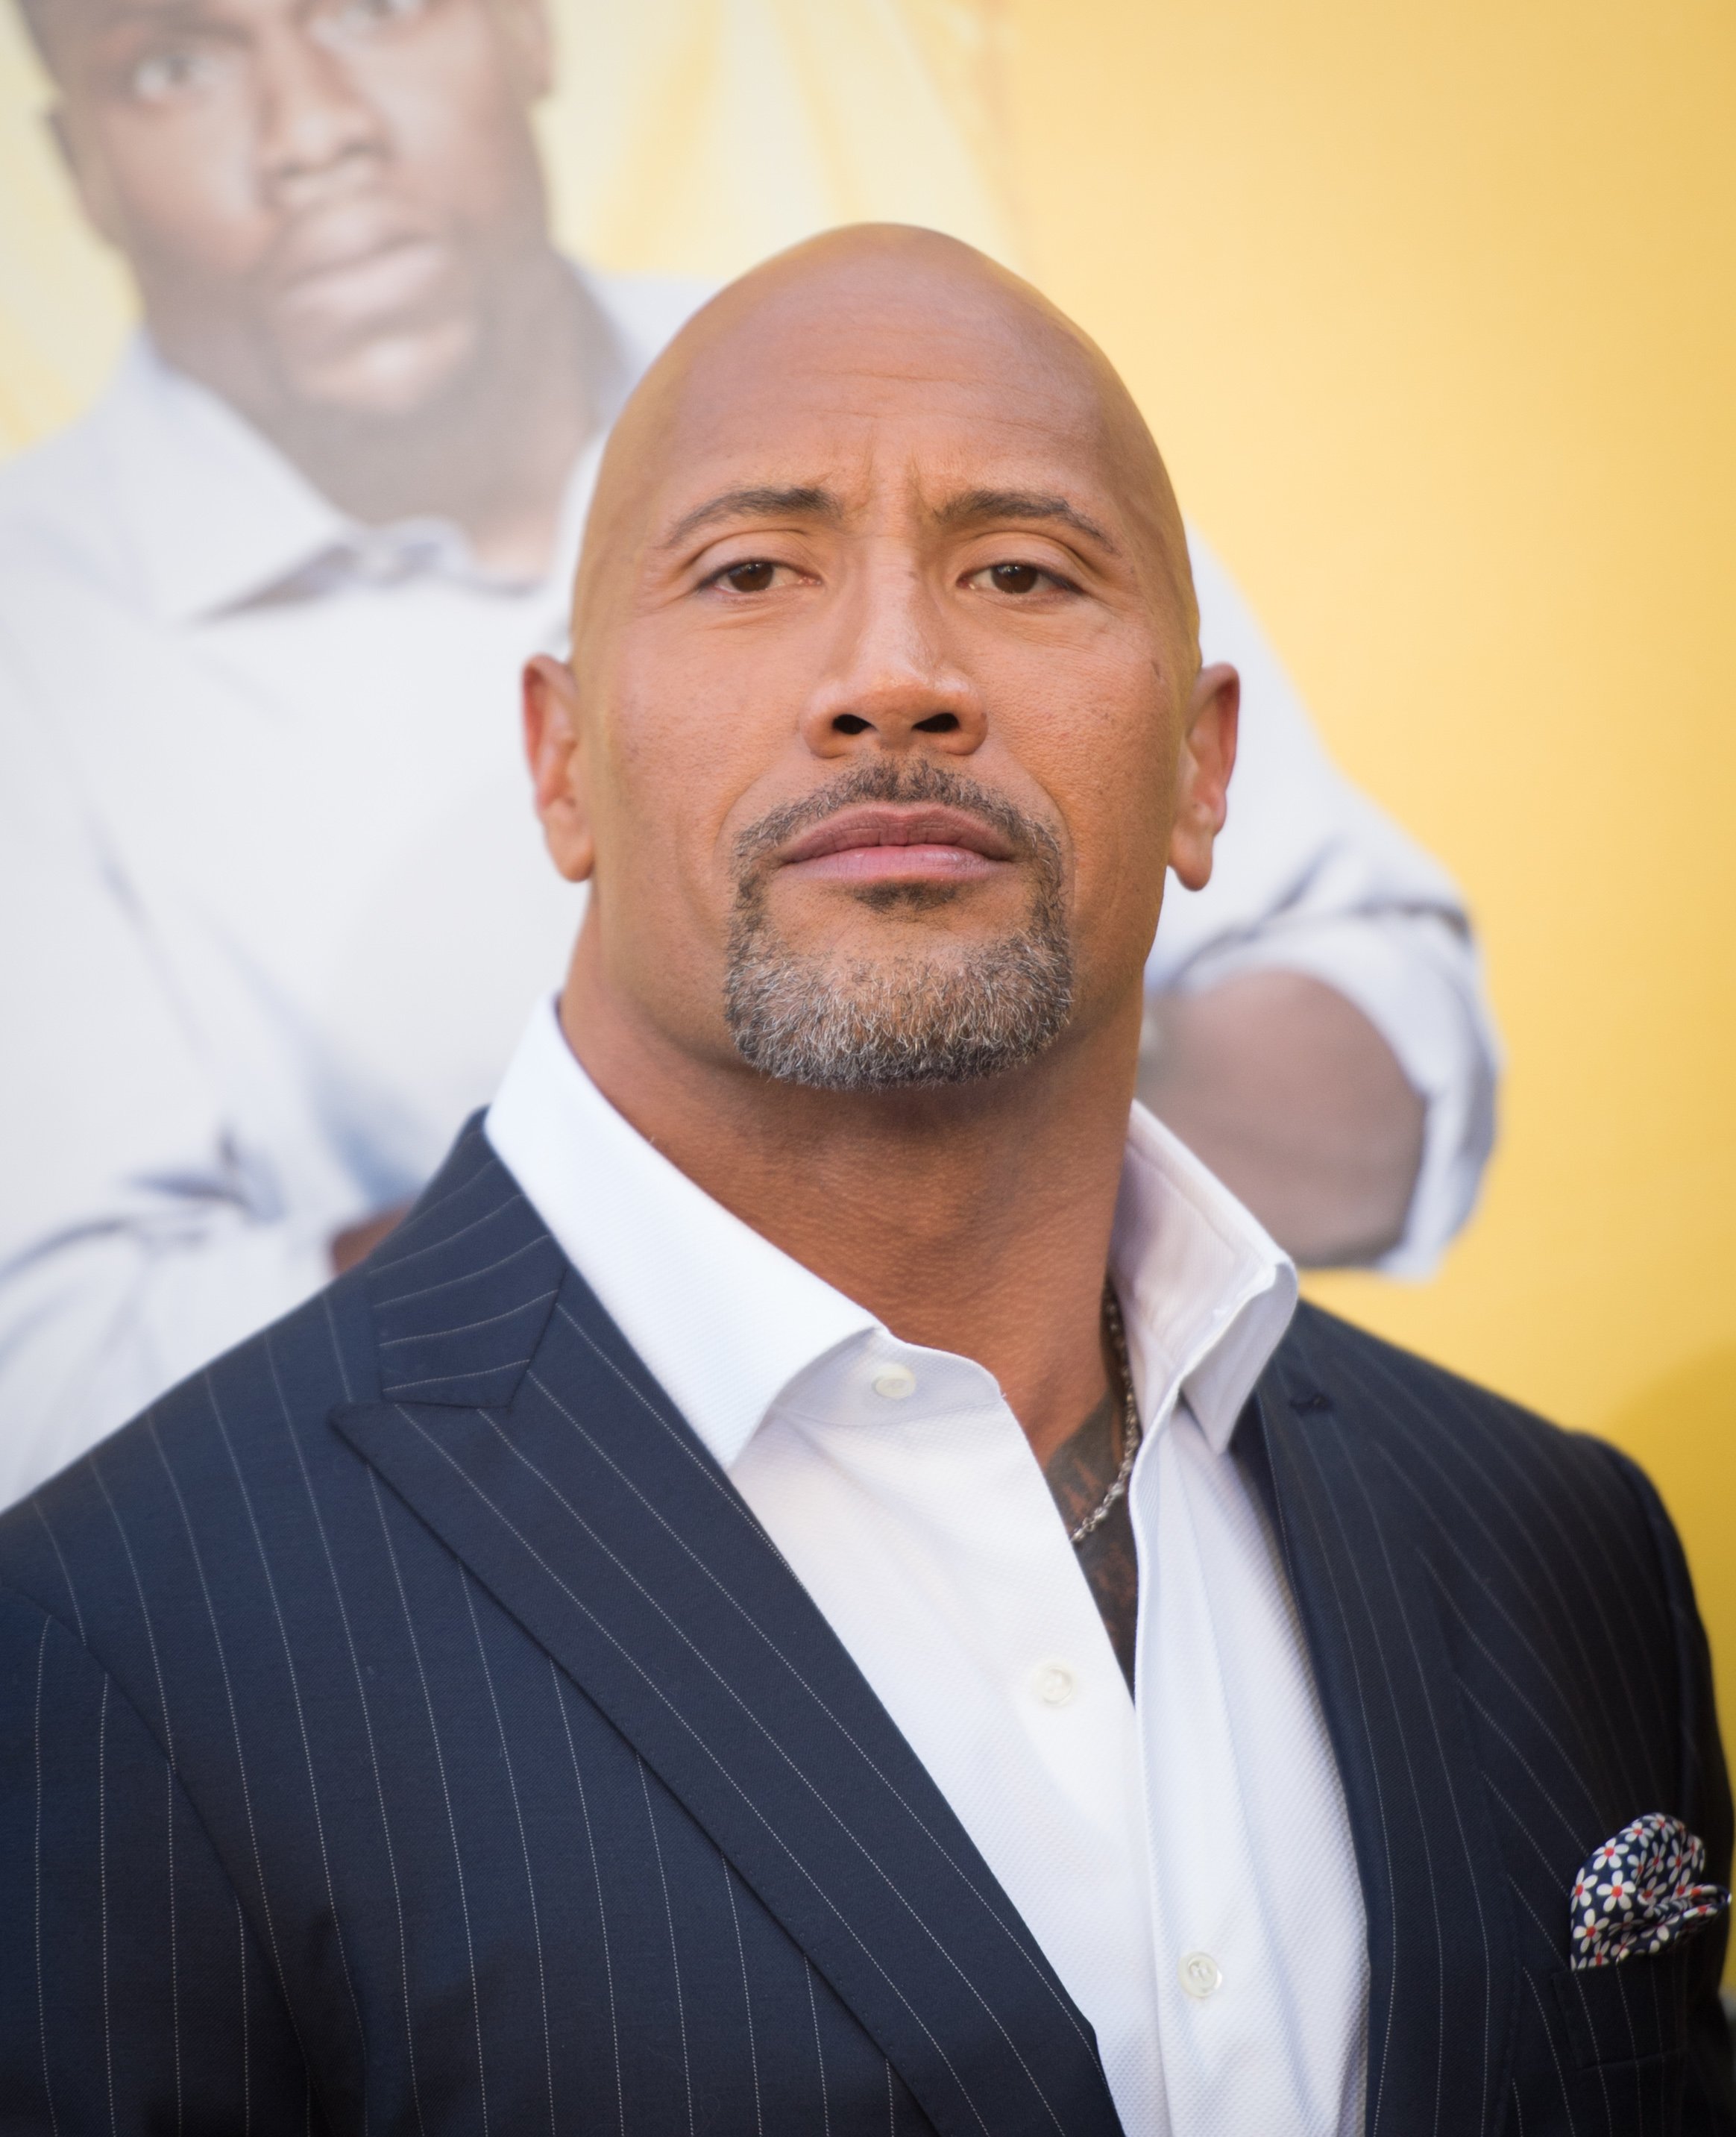 Dwayne Johnson attends the premiere of "Central Intelligence" on June 10, 2016, in Westwood, California. | Source: Getty Images.